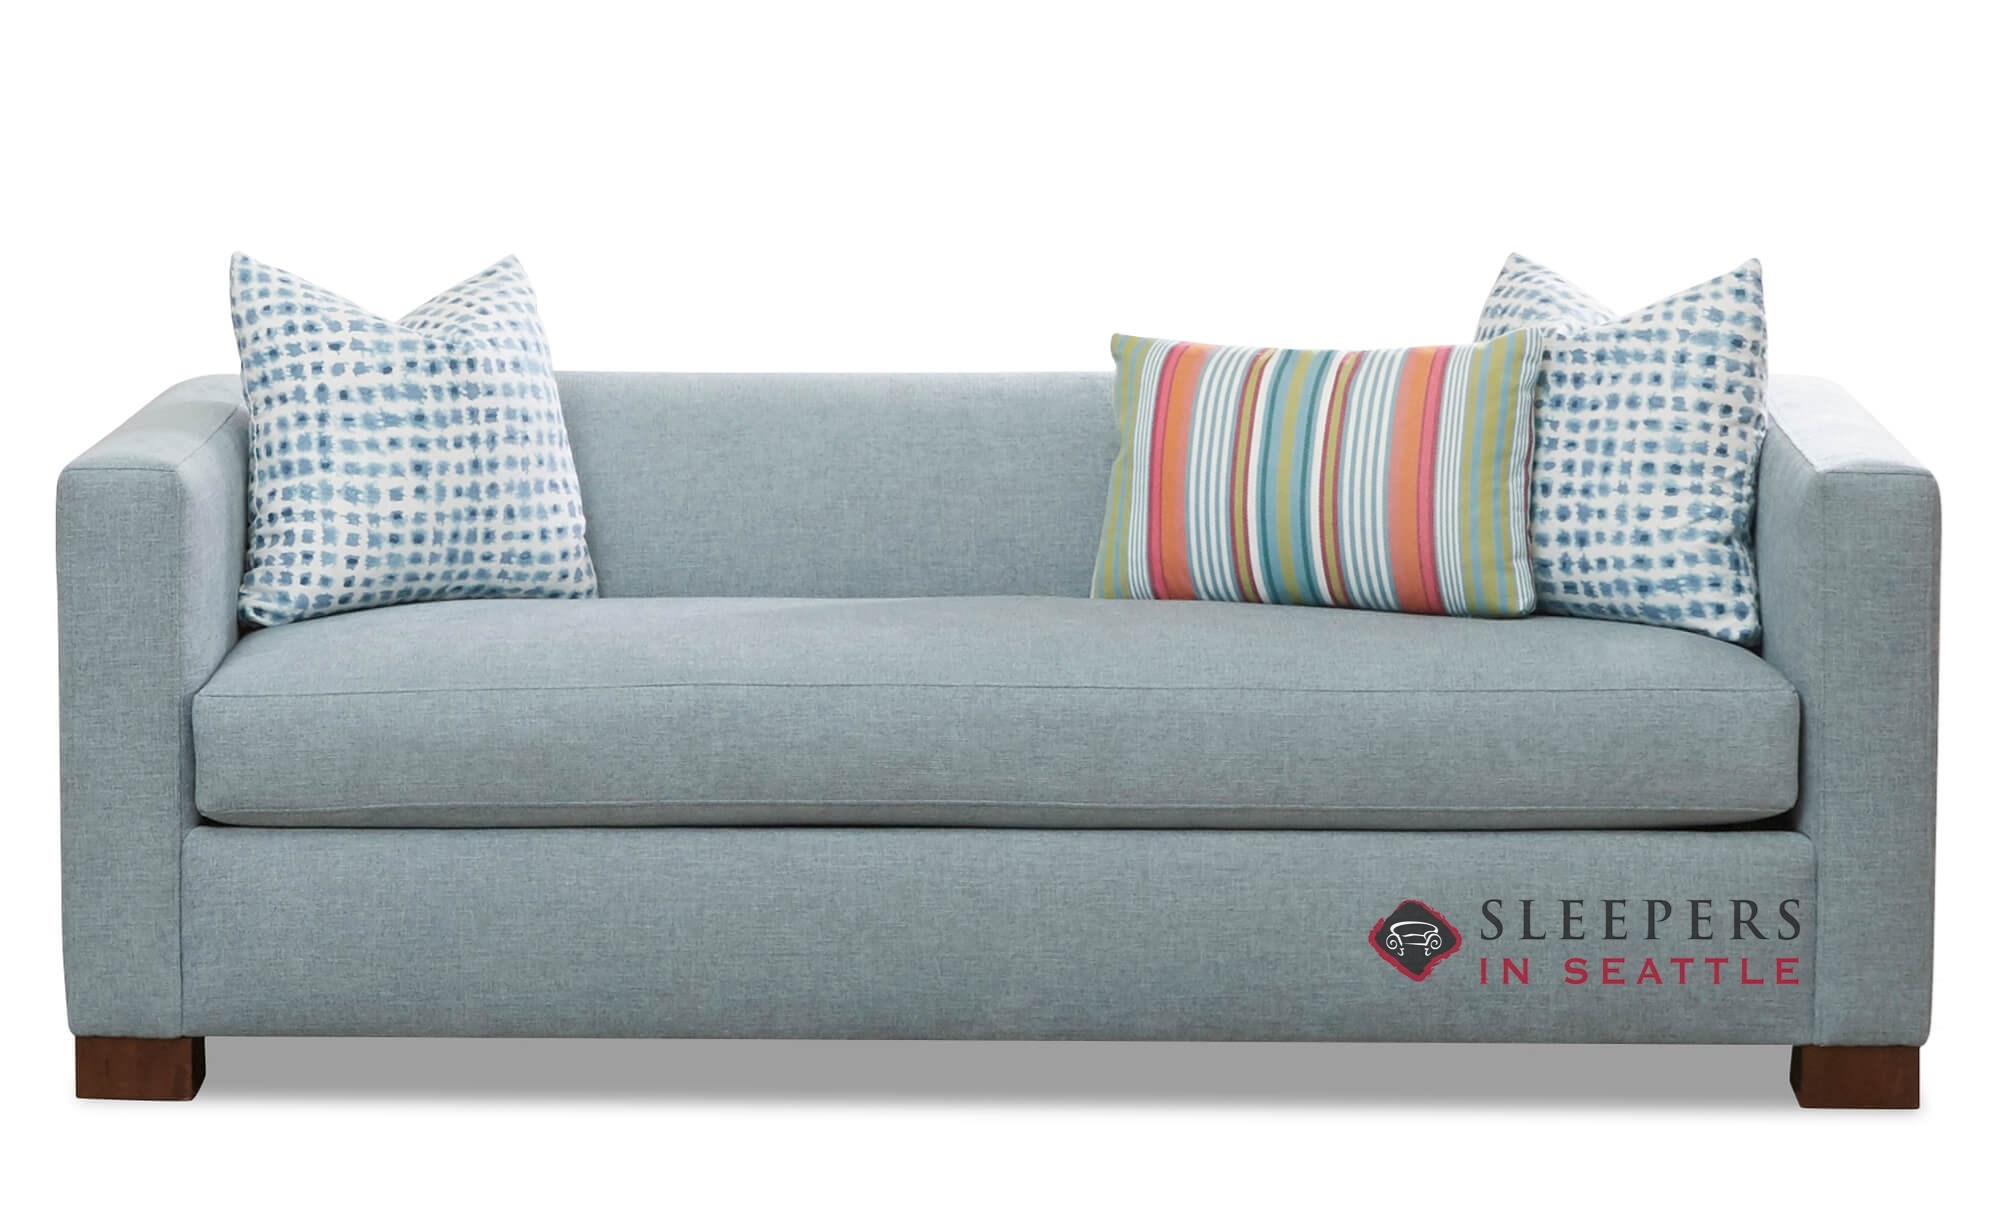 Customize And Personalize Rochester Full Fabric Sofa By Savvy Size Bed Sleepersinseattle Com